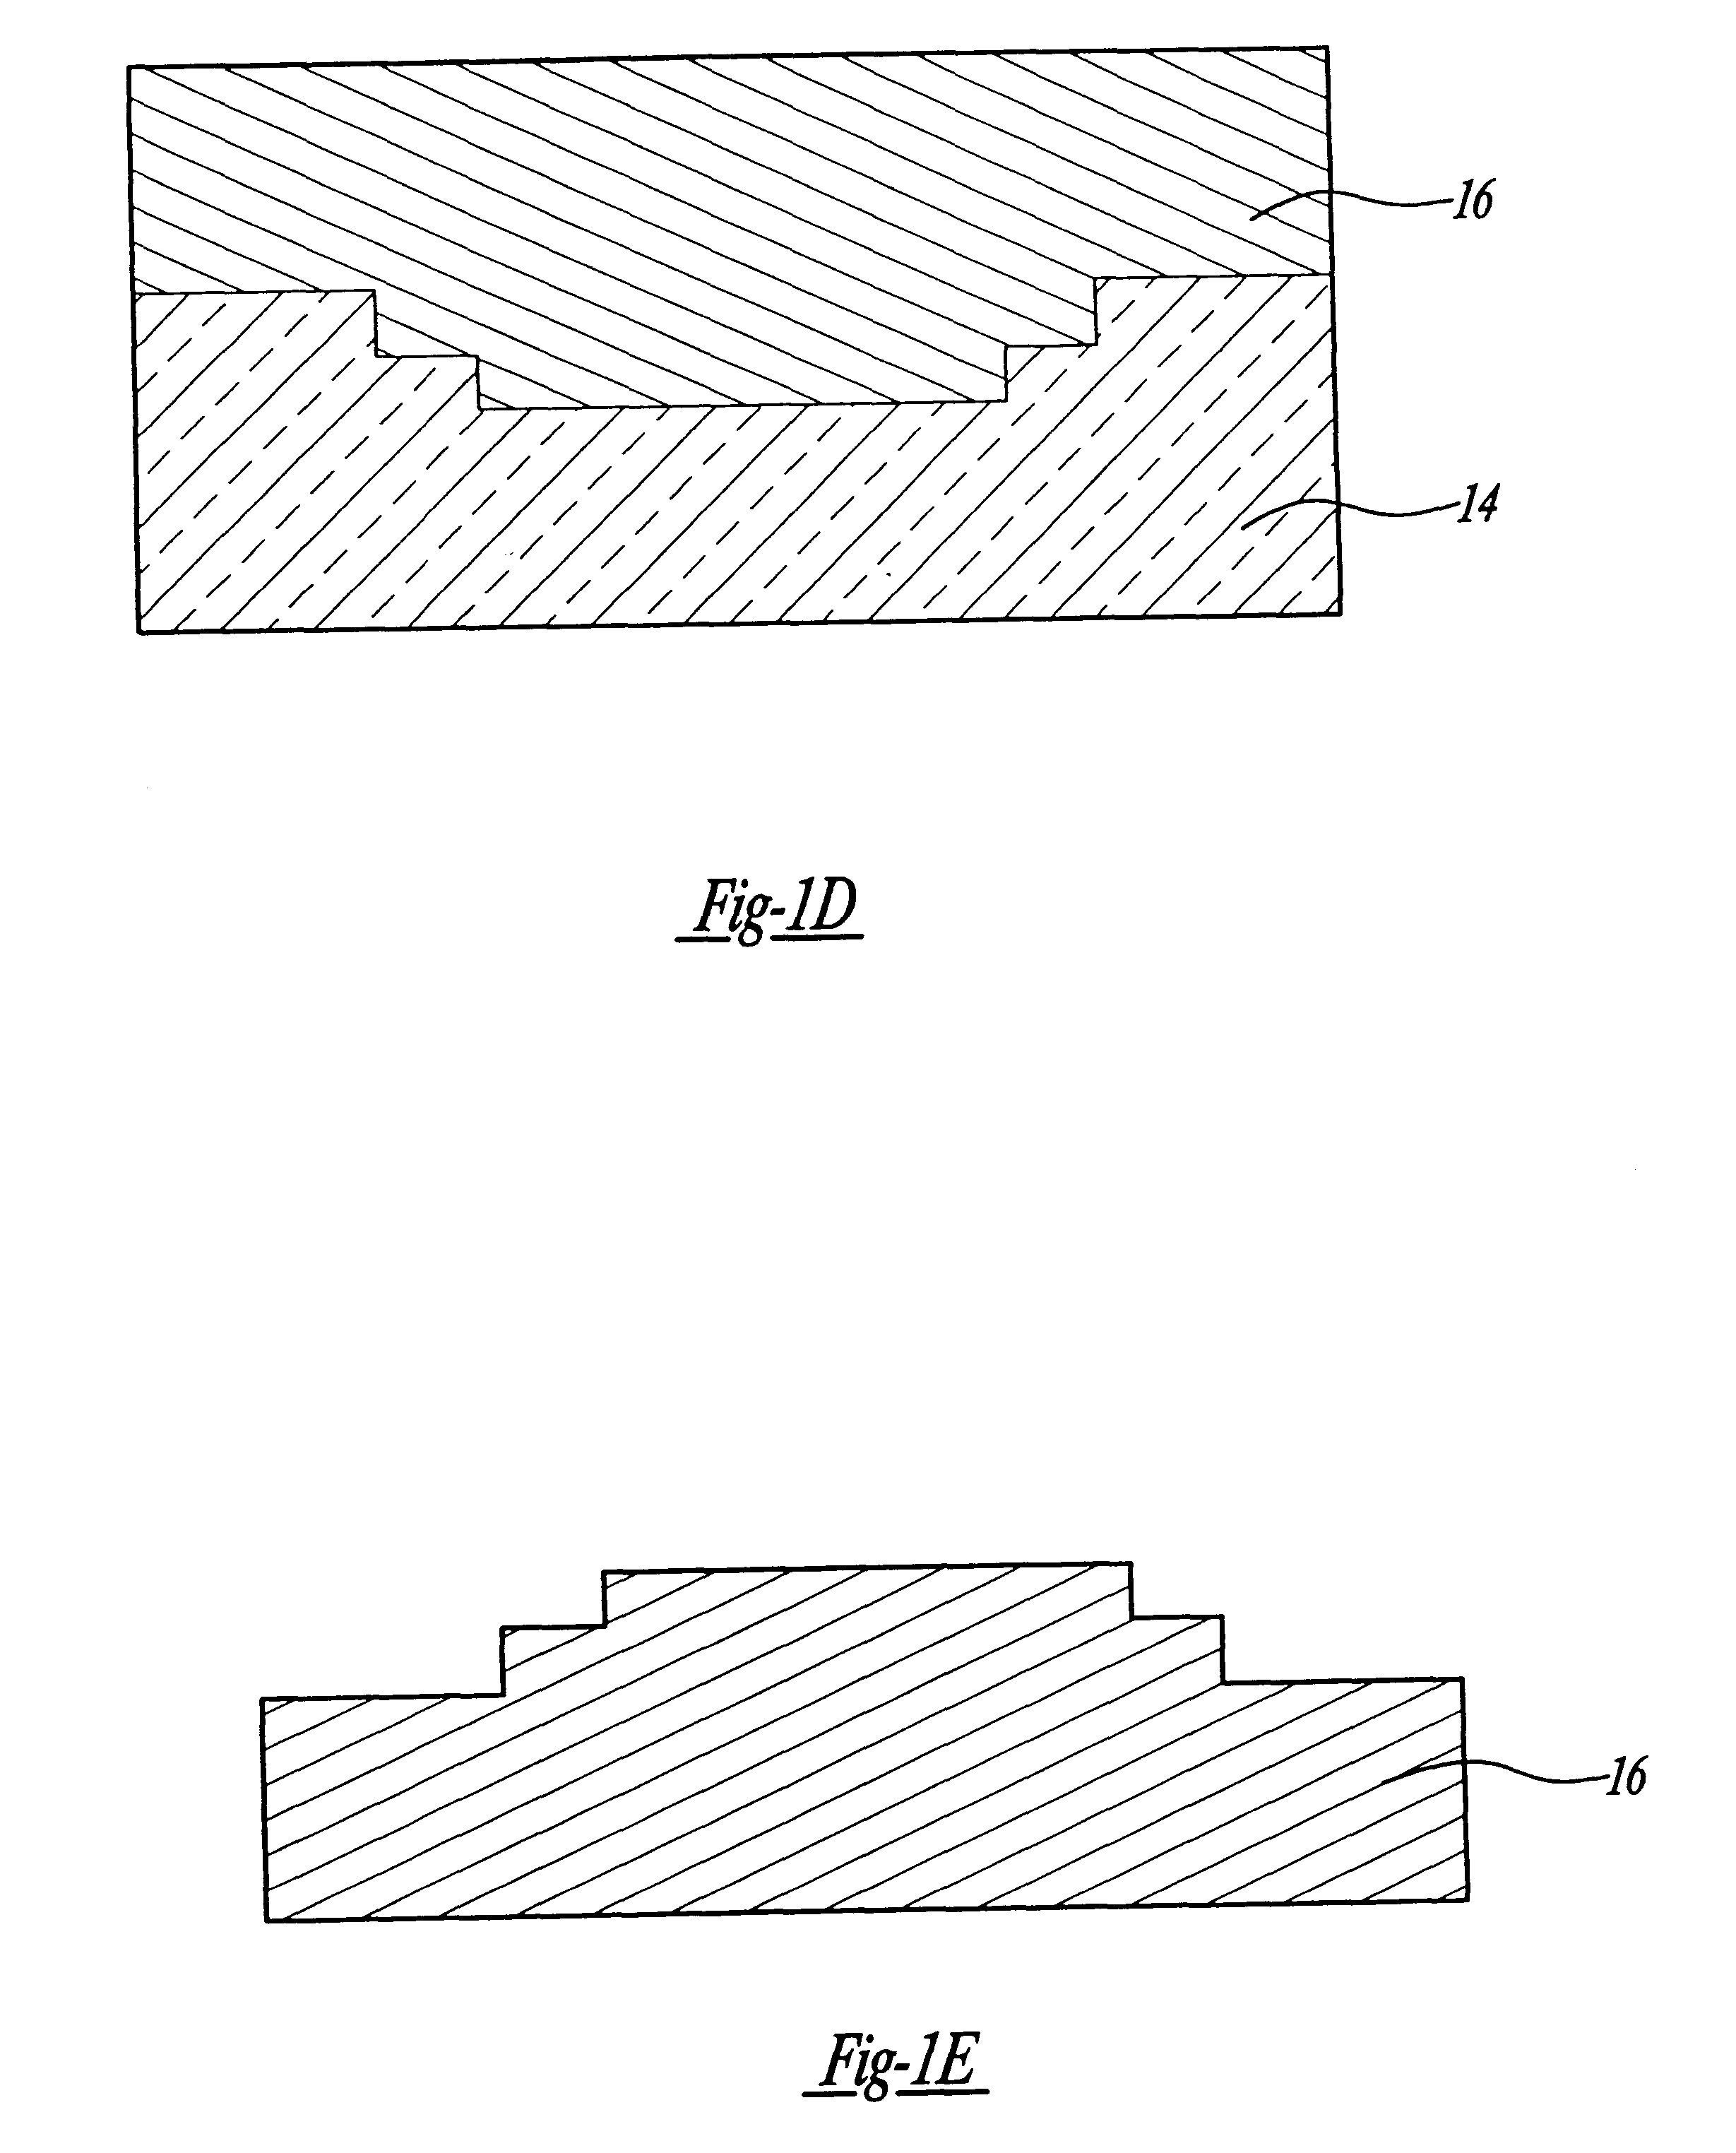 Method of reducing distortion in a spray formed rapid tool